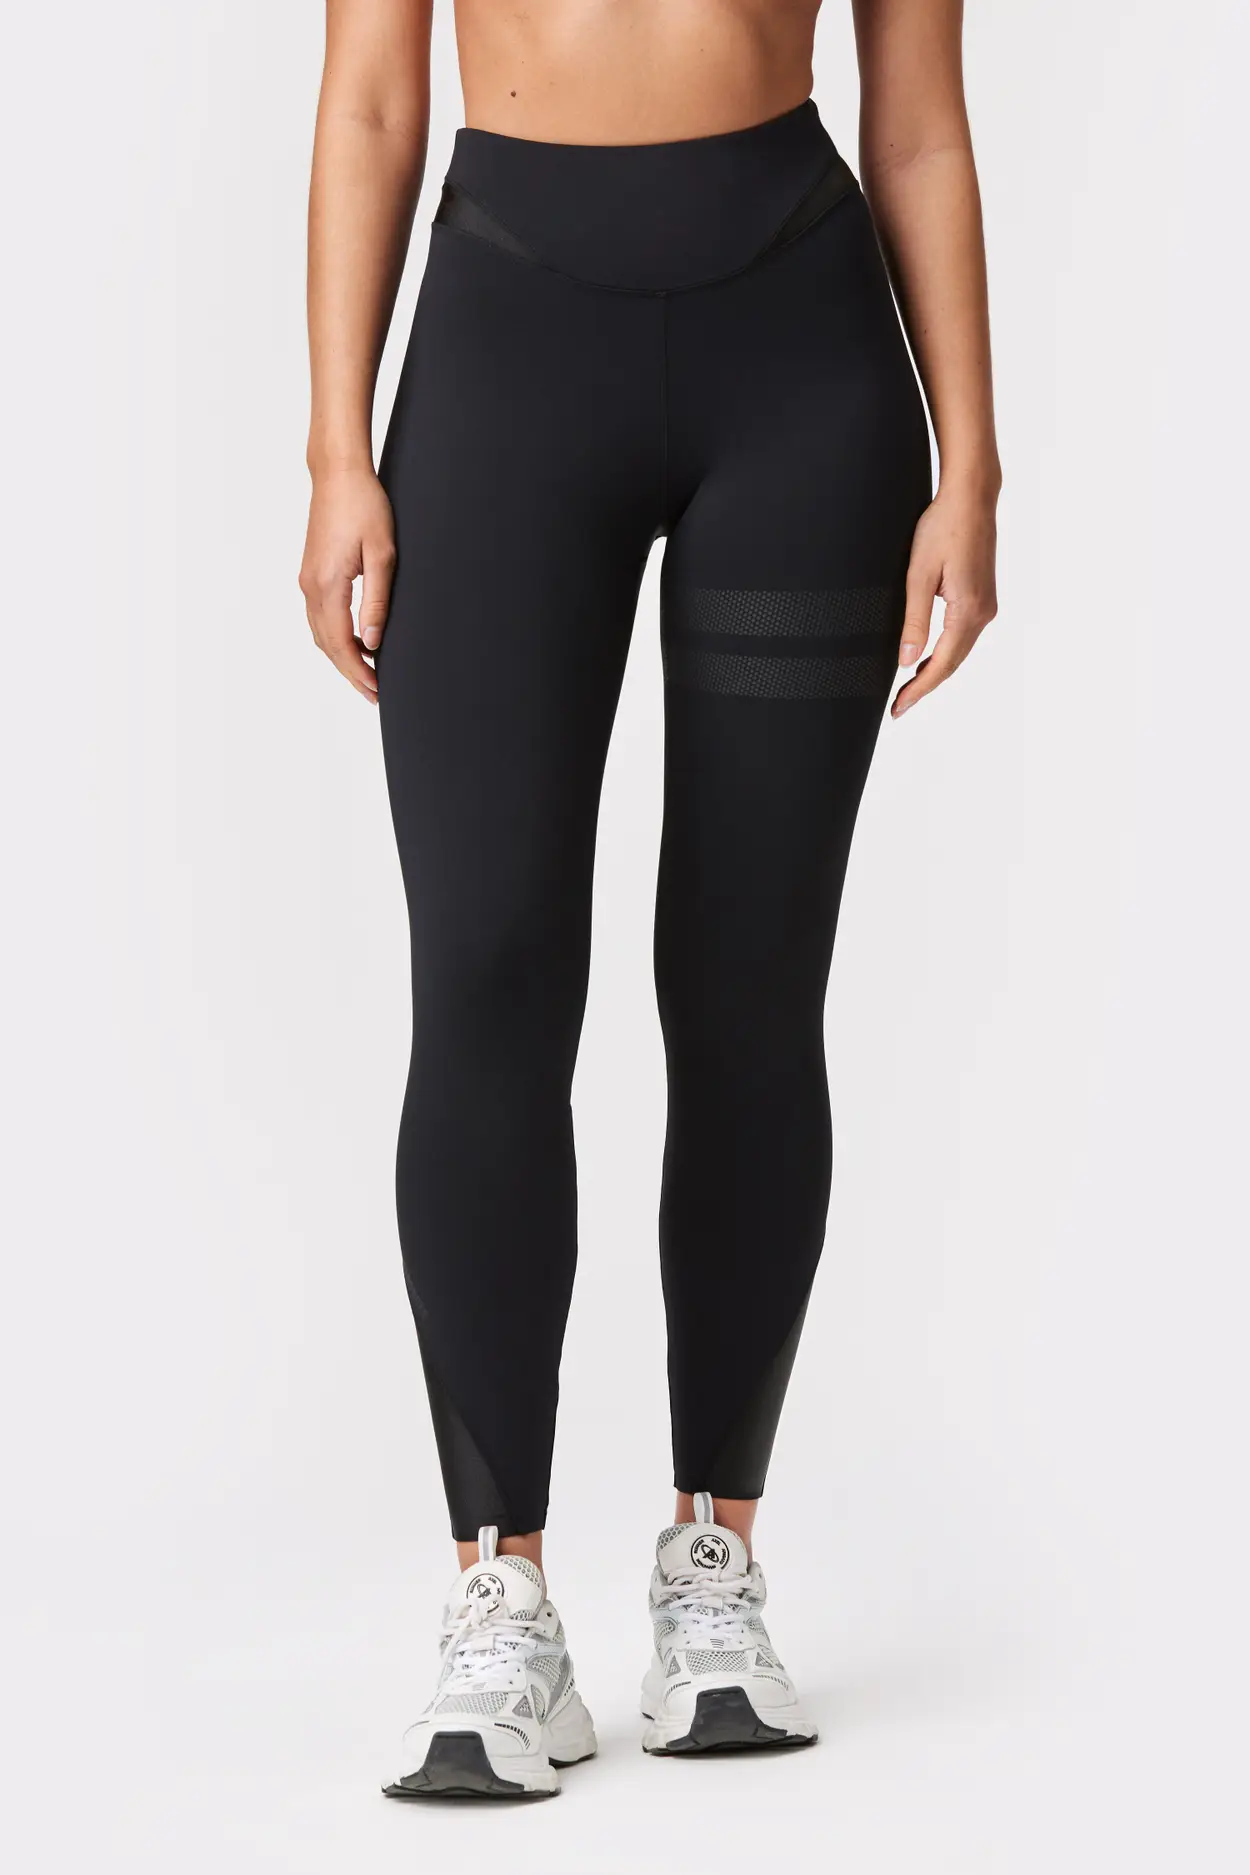 FABLETICS, Seamless High-Waisted Mesh Leggings in a - Depop